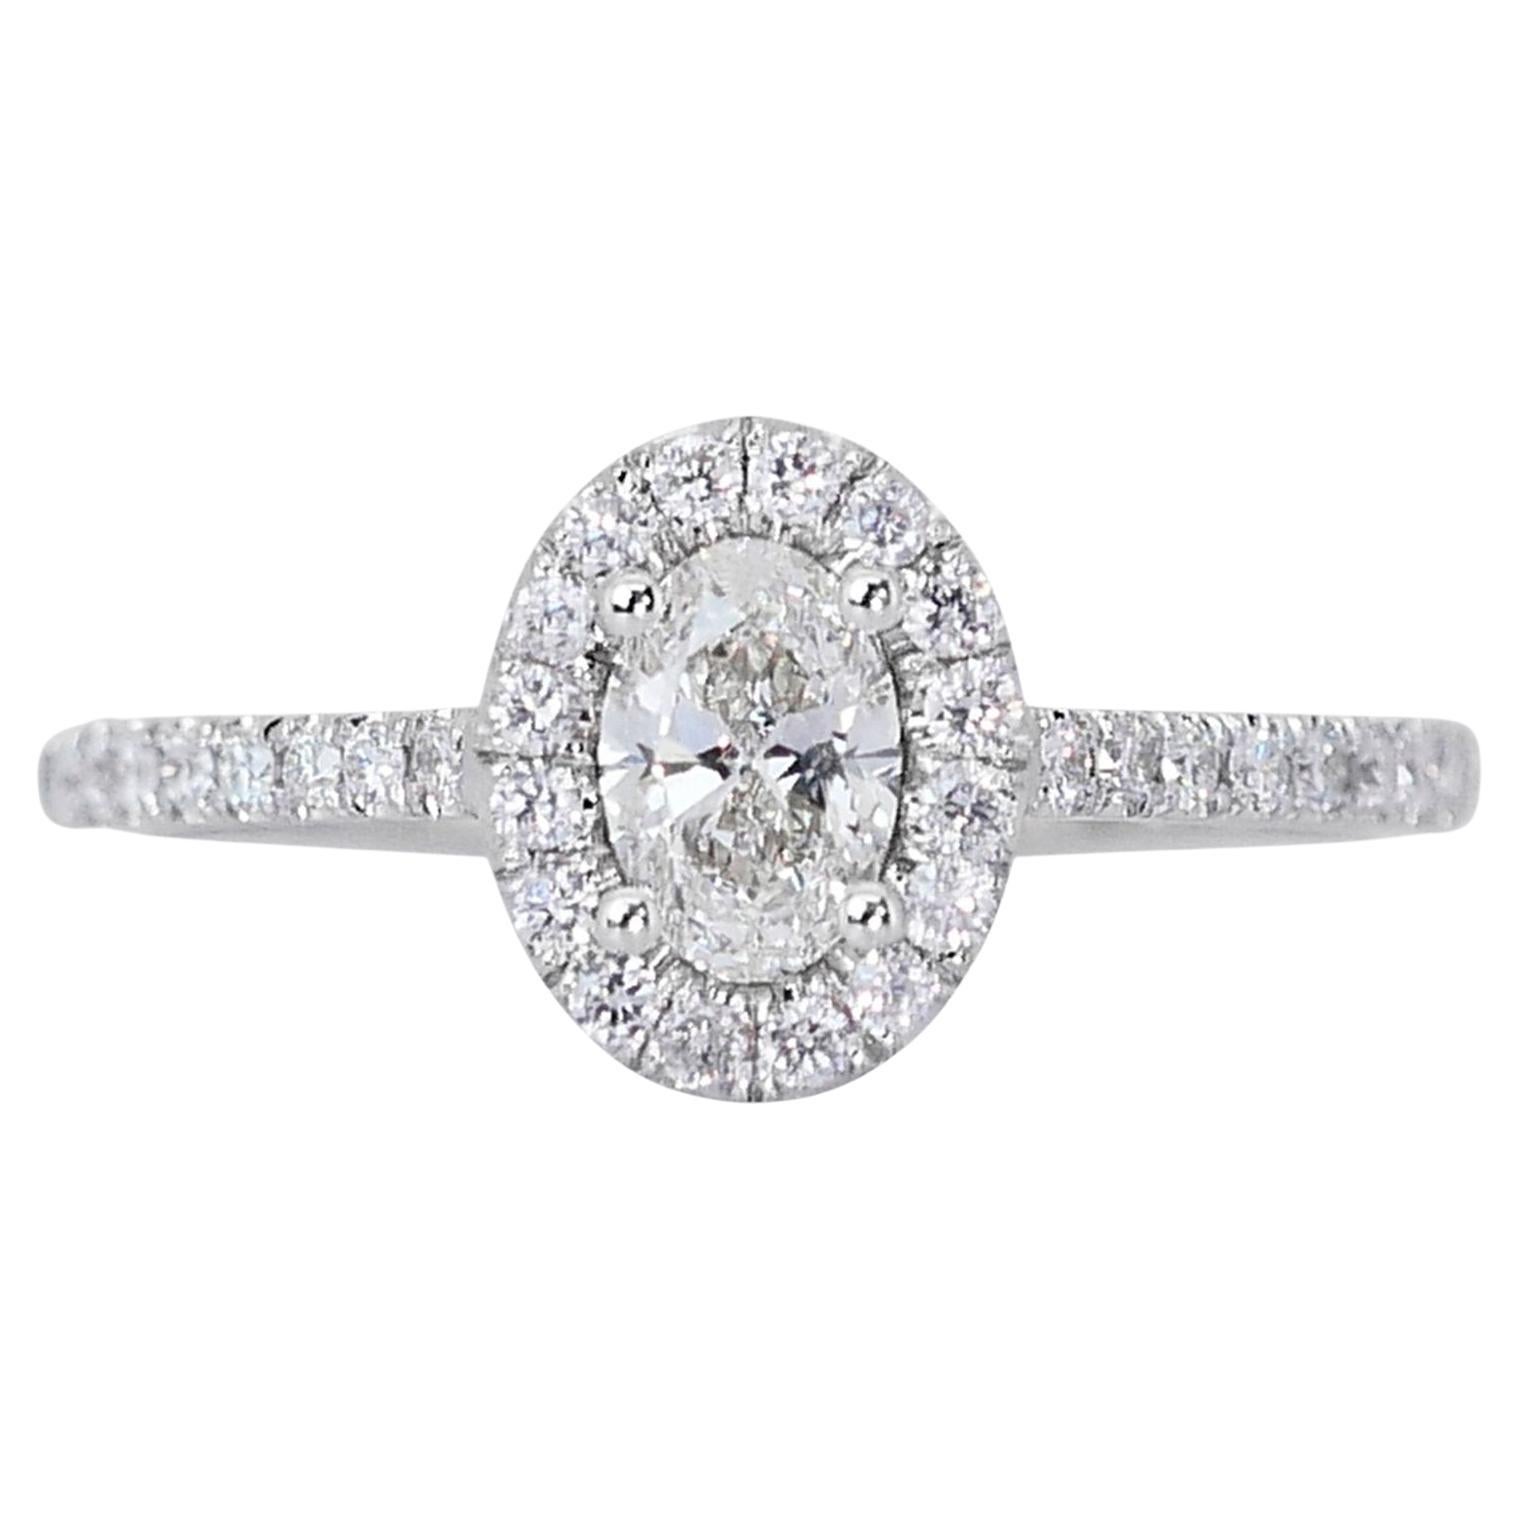 Sparkling 1.00ct Oval Diamond Halo Ring in 18k White Gold - GIA Certified